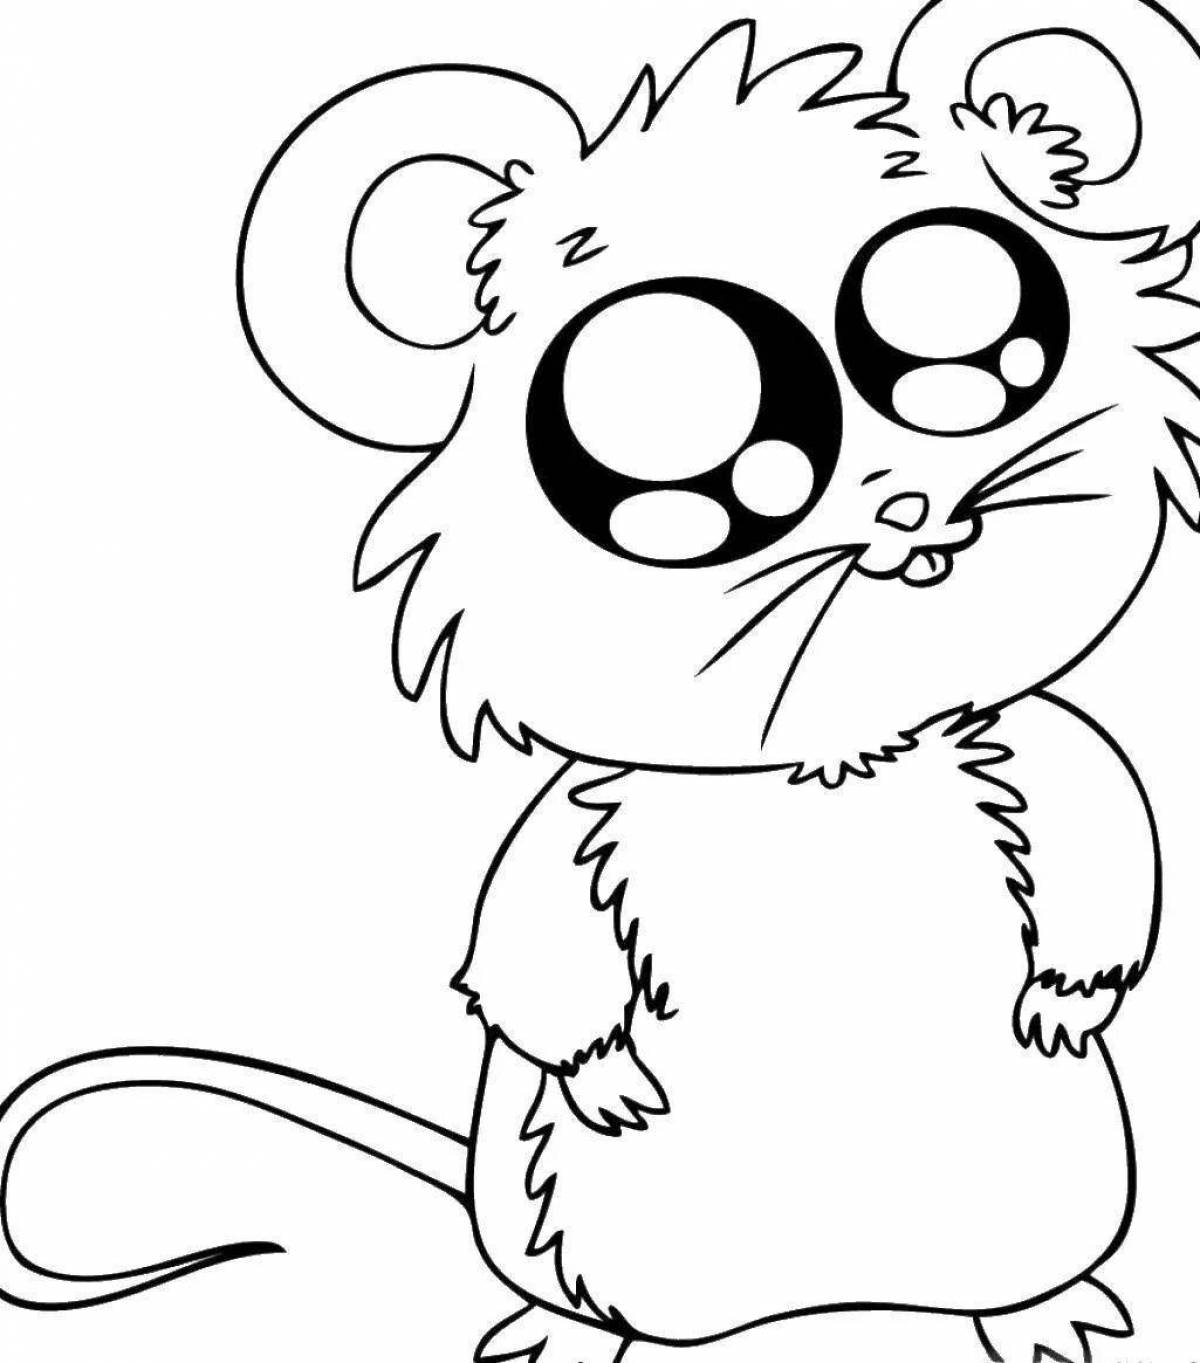 Coloring page quiet pussies